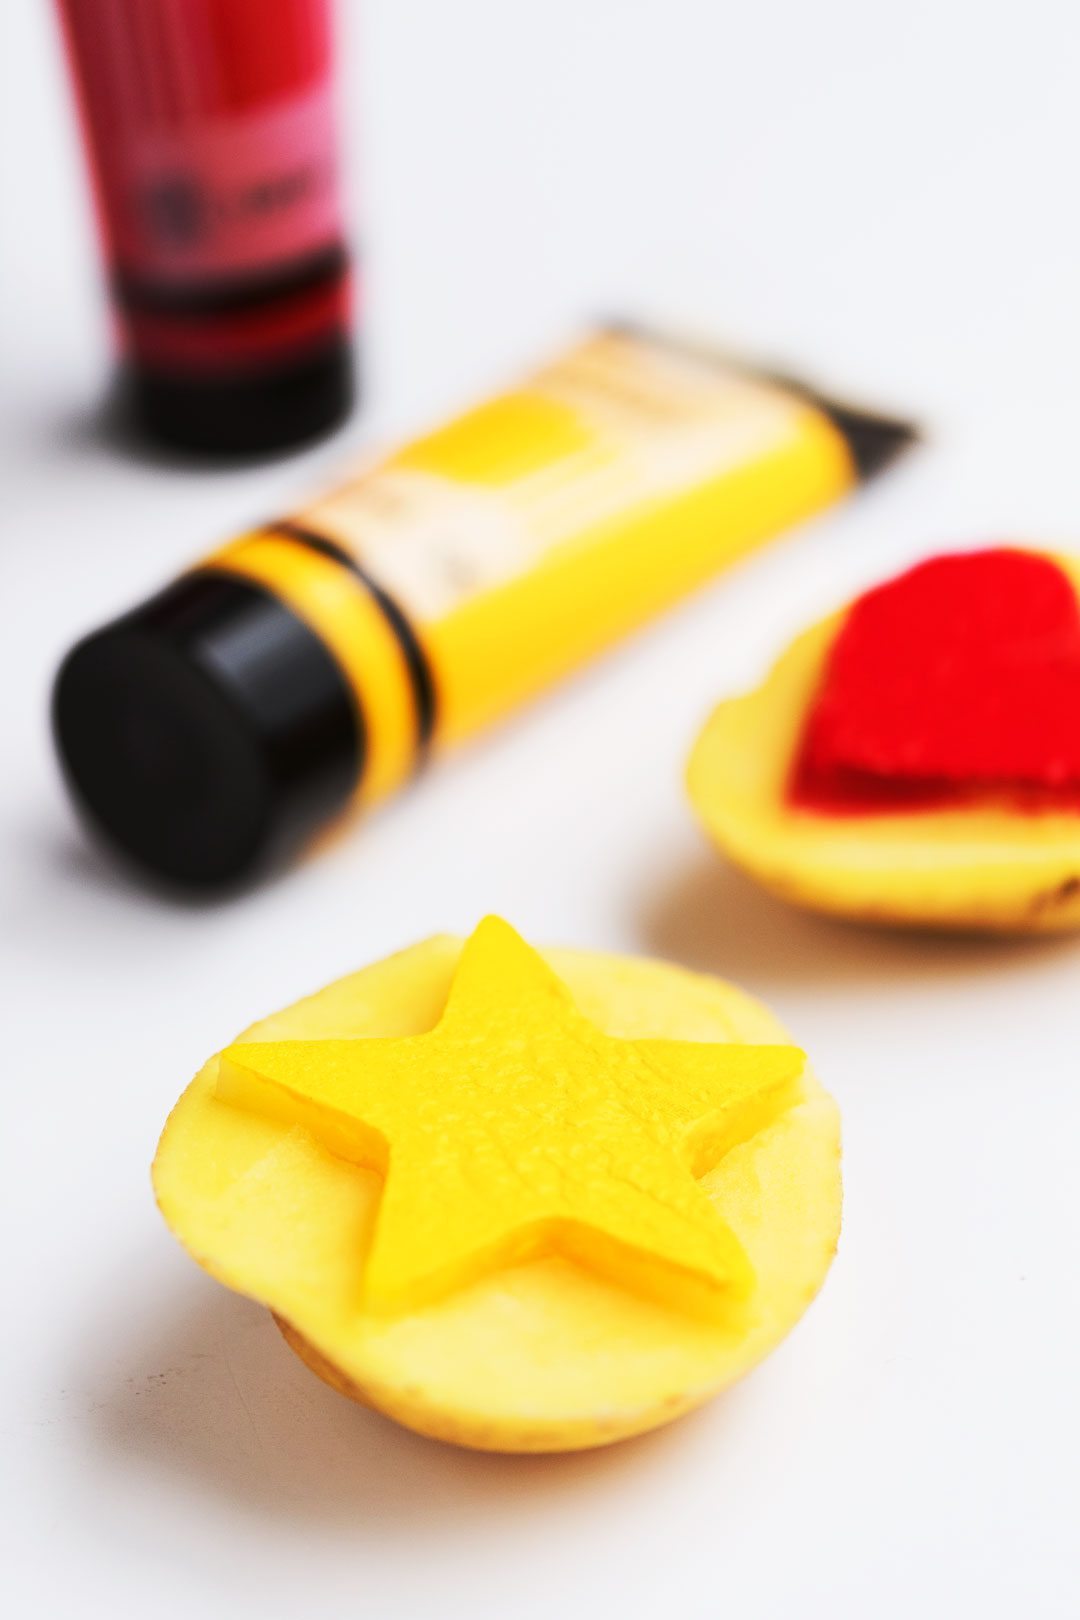 Red paint tube, yellow paint tube, and two potato halves with a hart and star stamp cut into them.